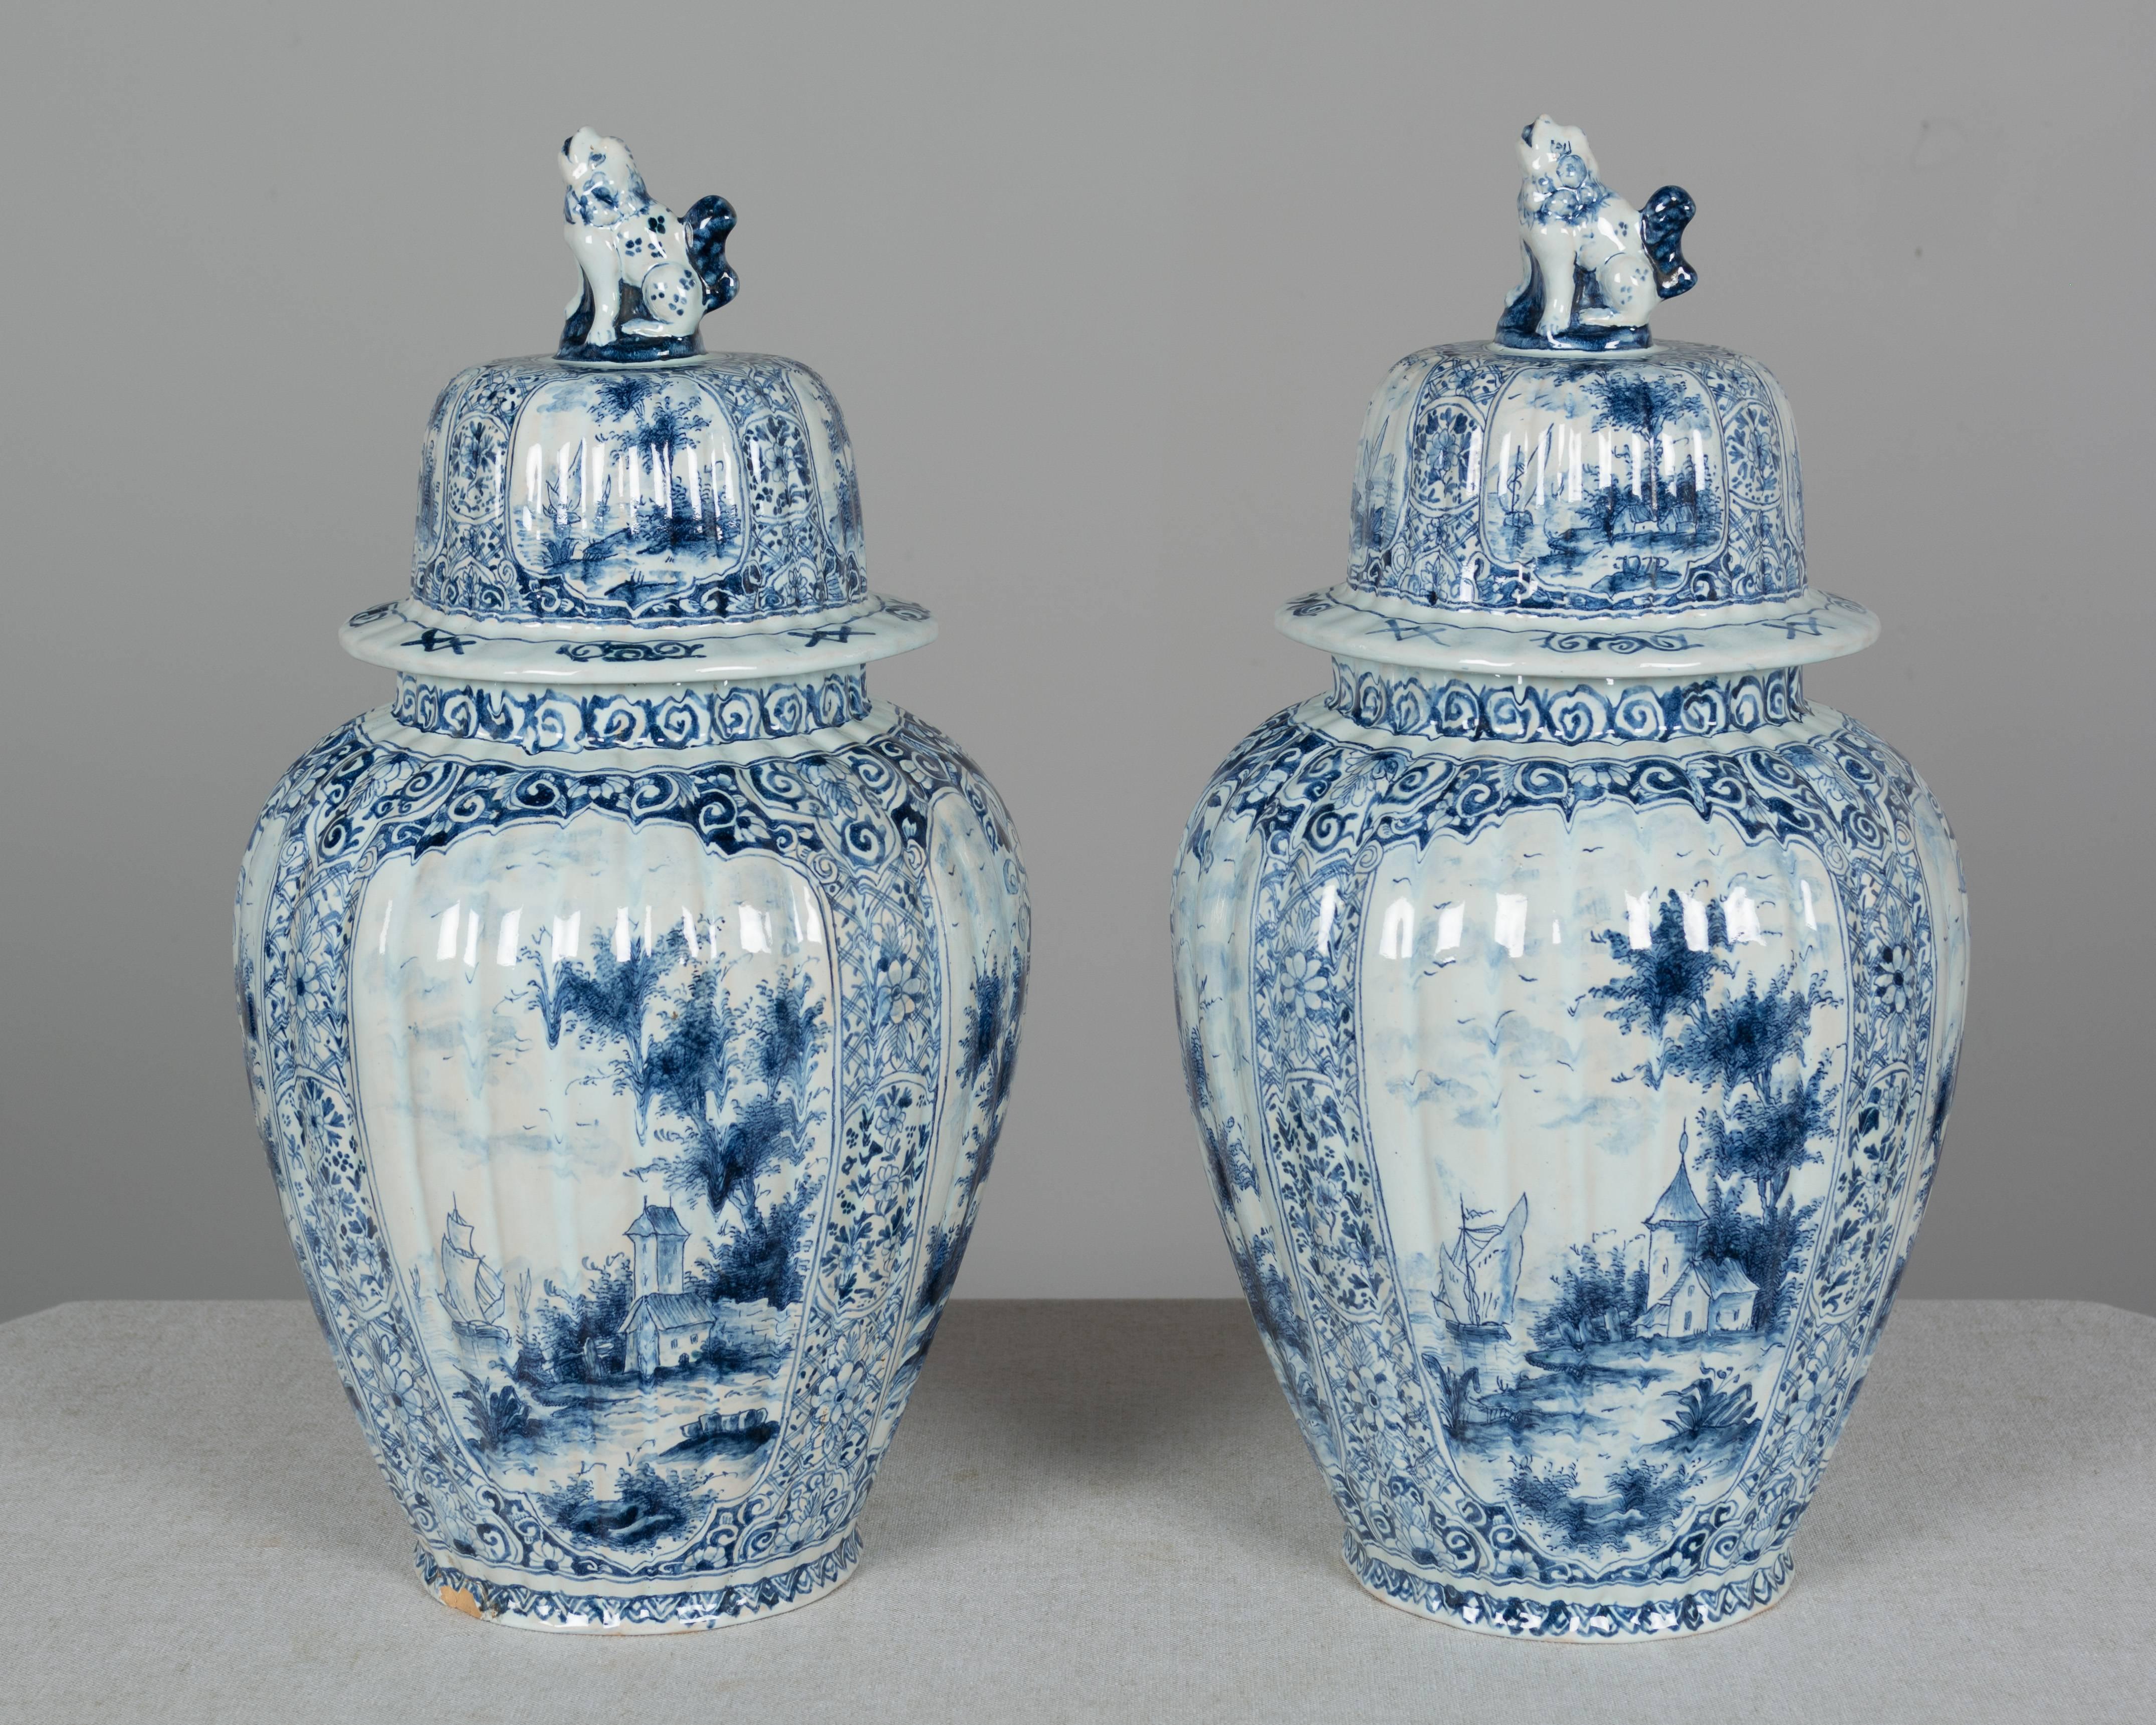 Hand-Painted Pair of Delft Faience Urns